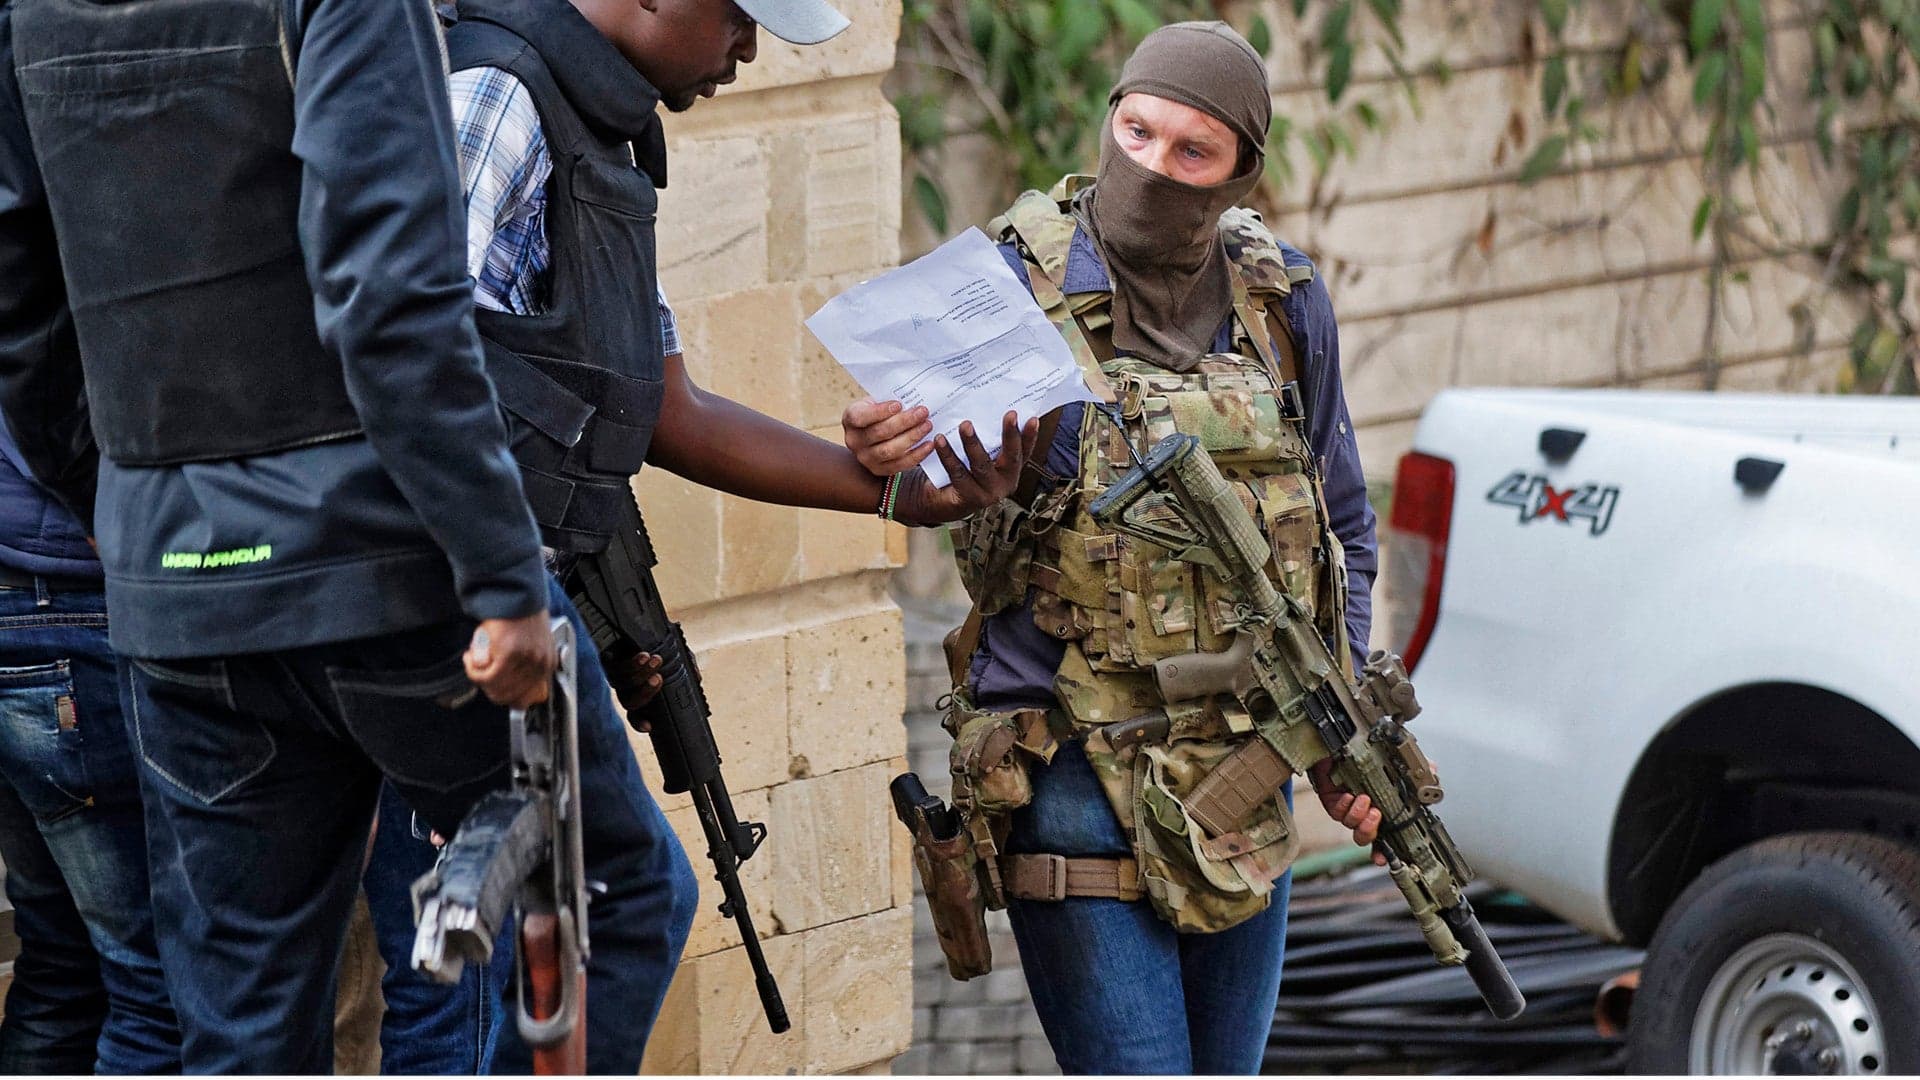 Mystery Pirate Patch-Wearing Special Operator Jumped In To Help Kenyans During Hotel Attack